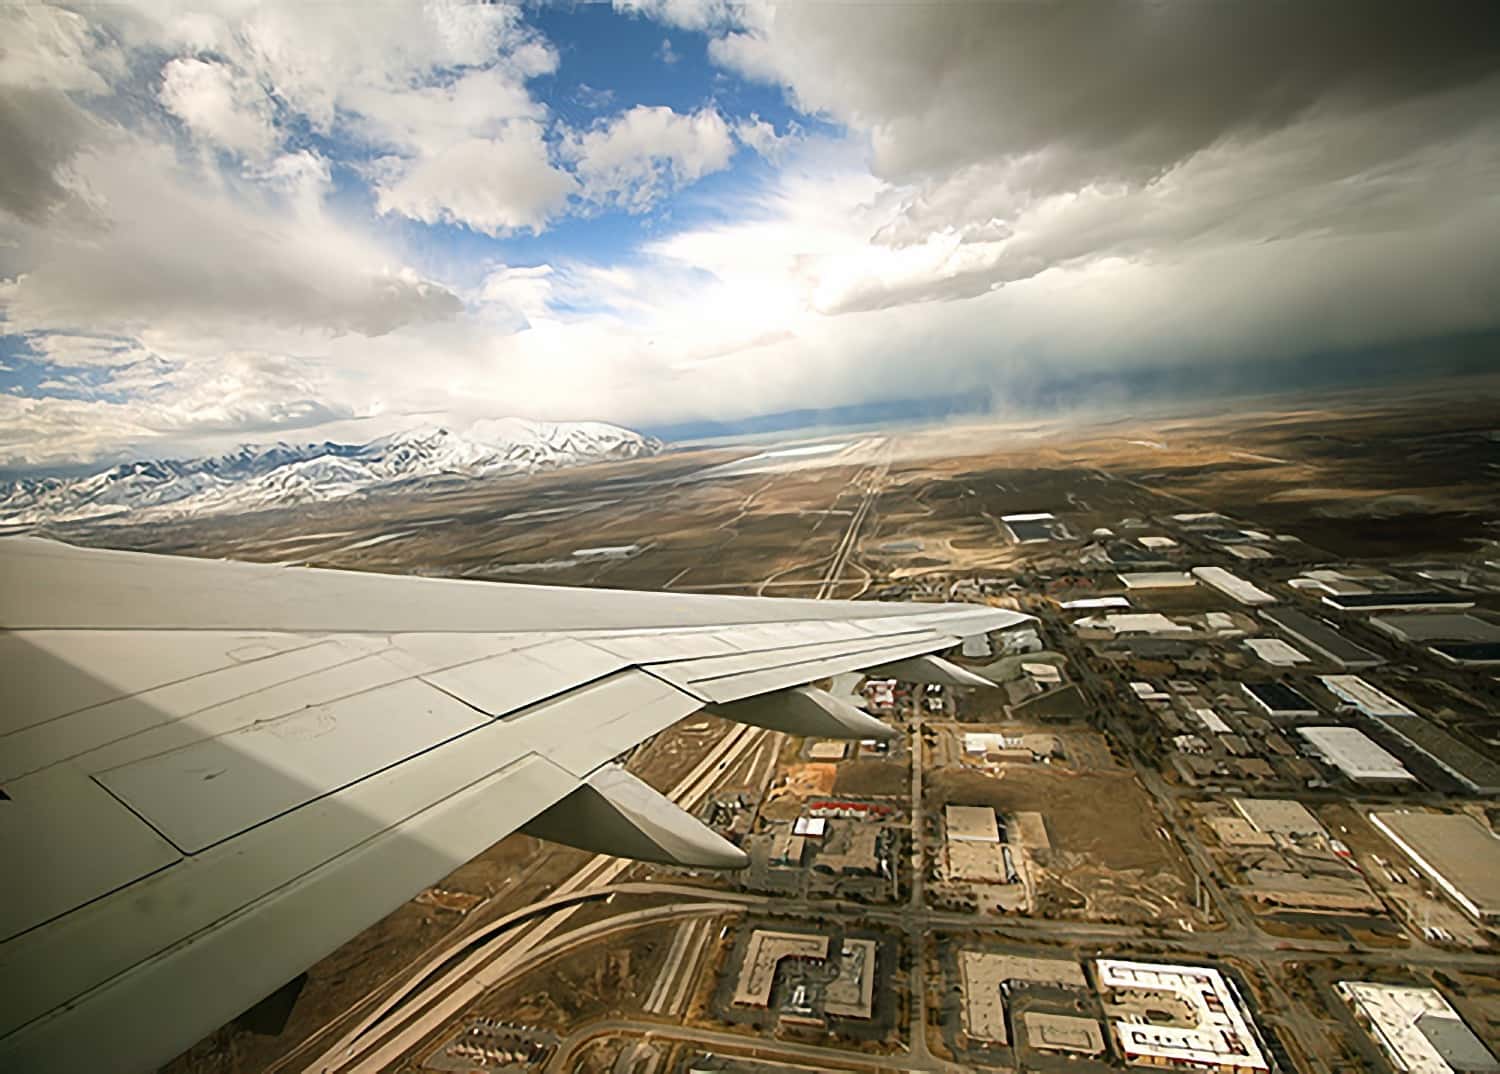 winging out of SLC. Source.